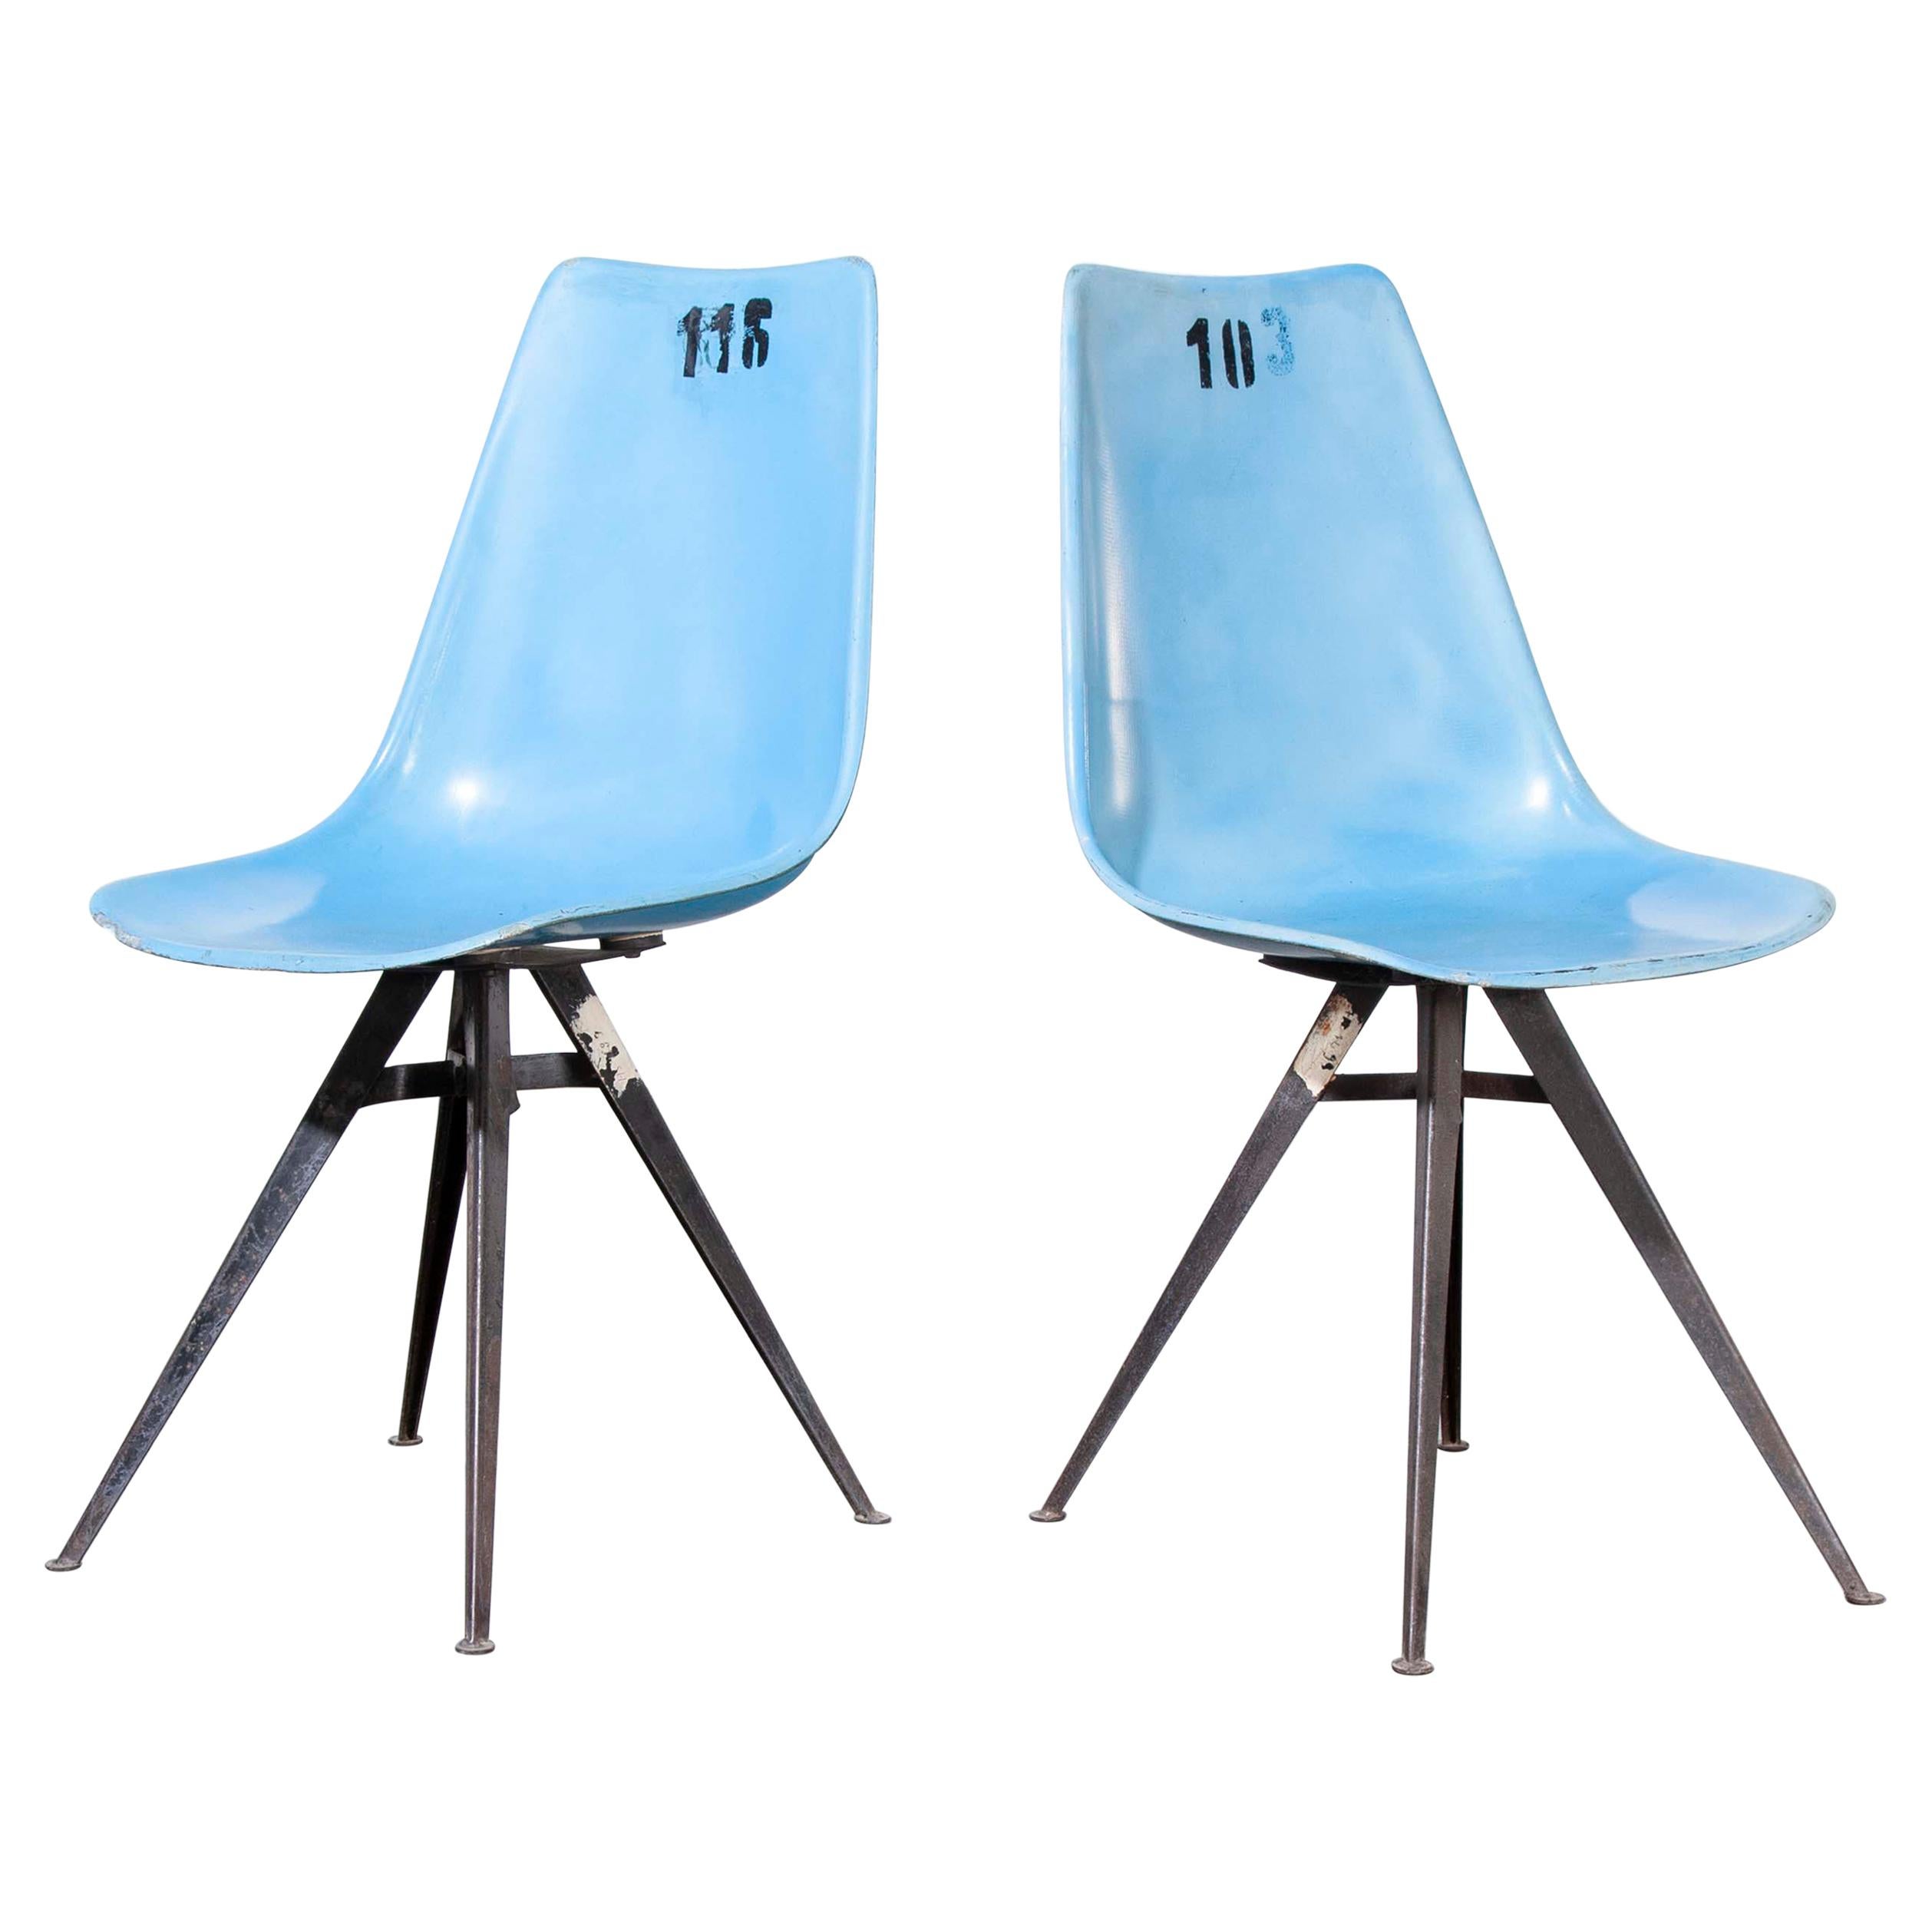 1960s Pair of Original Blue Fiberglass Side / Dining Chairs For Sale